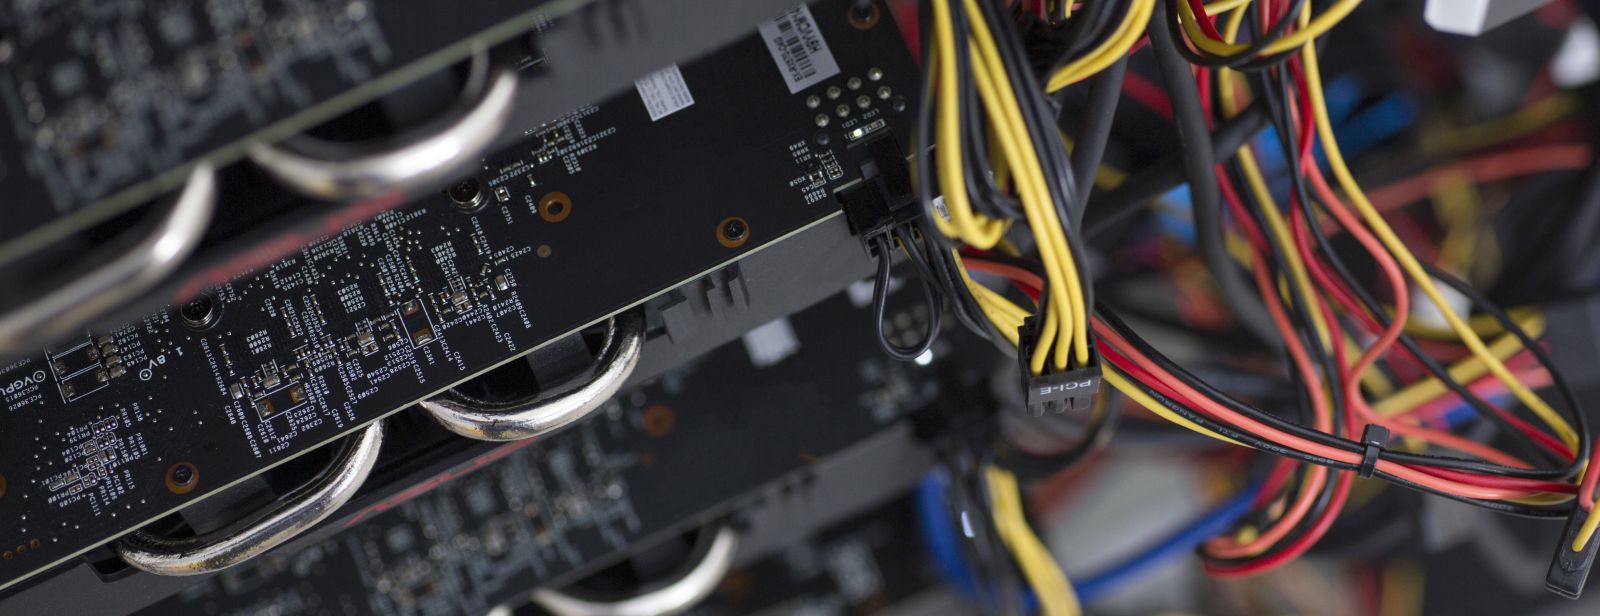 graphics cards in the cryptocurrency rig and PCI-E cables to power them